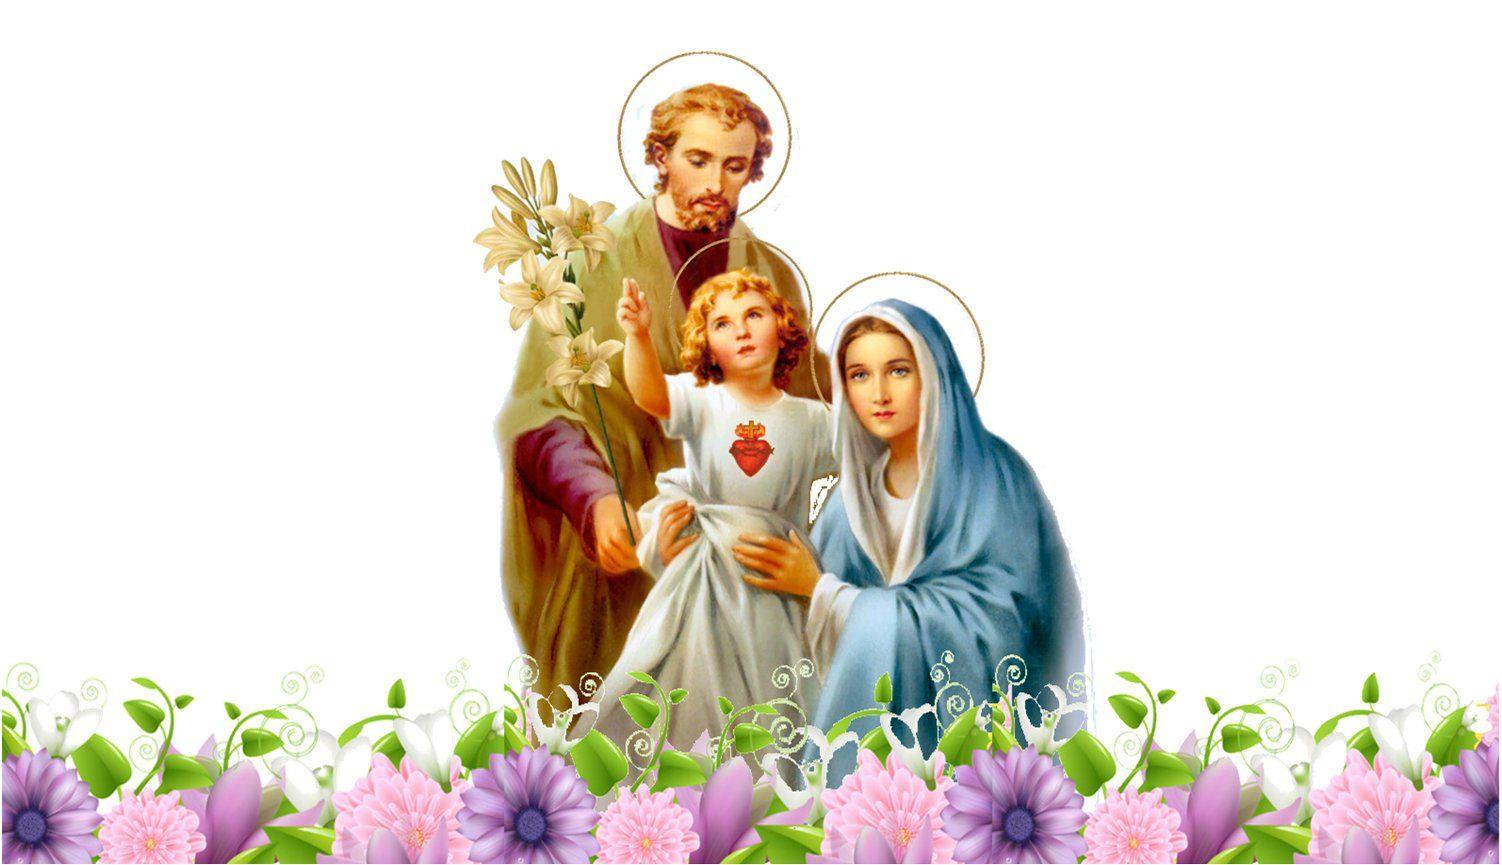 Holy Family Wallpapers - Top Free Holy Family Backgrounds ...